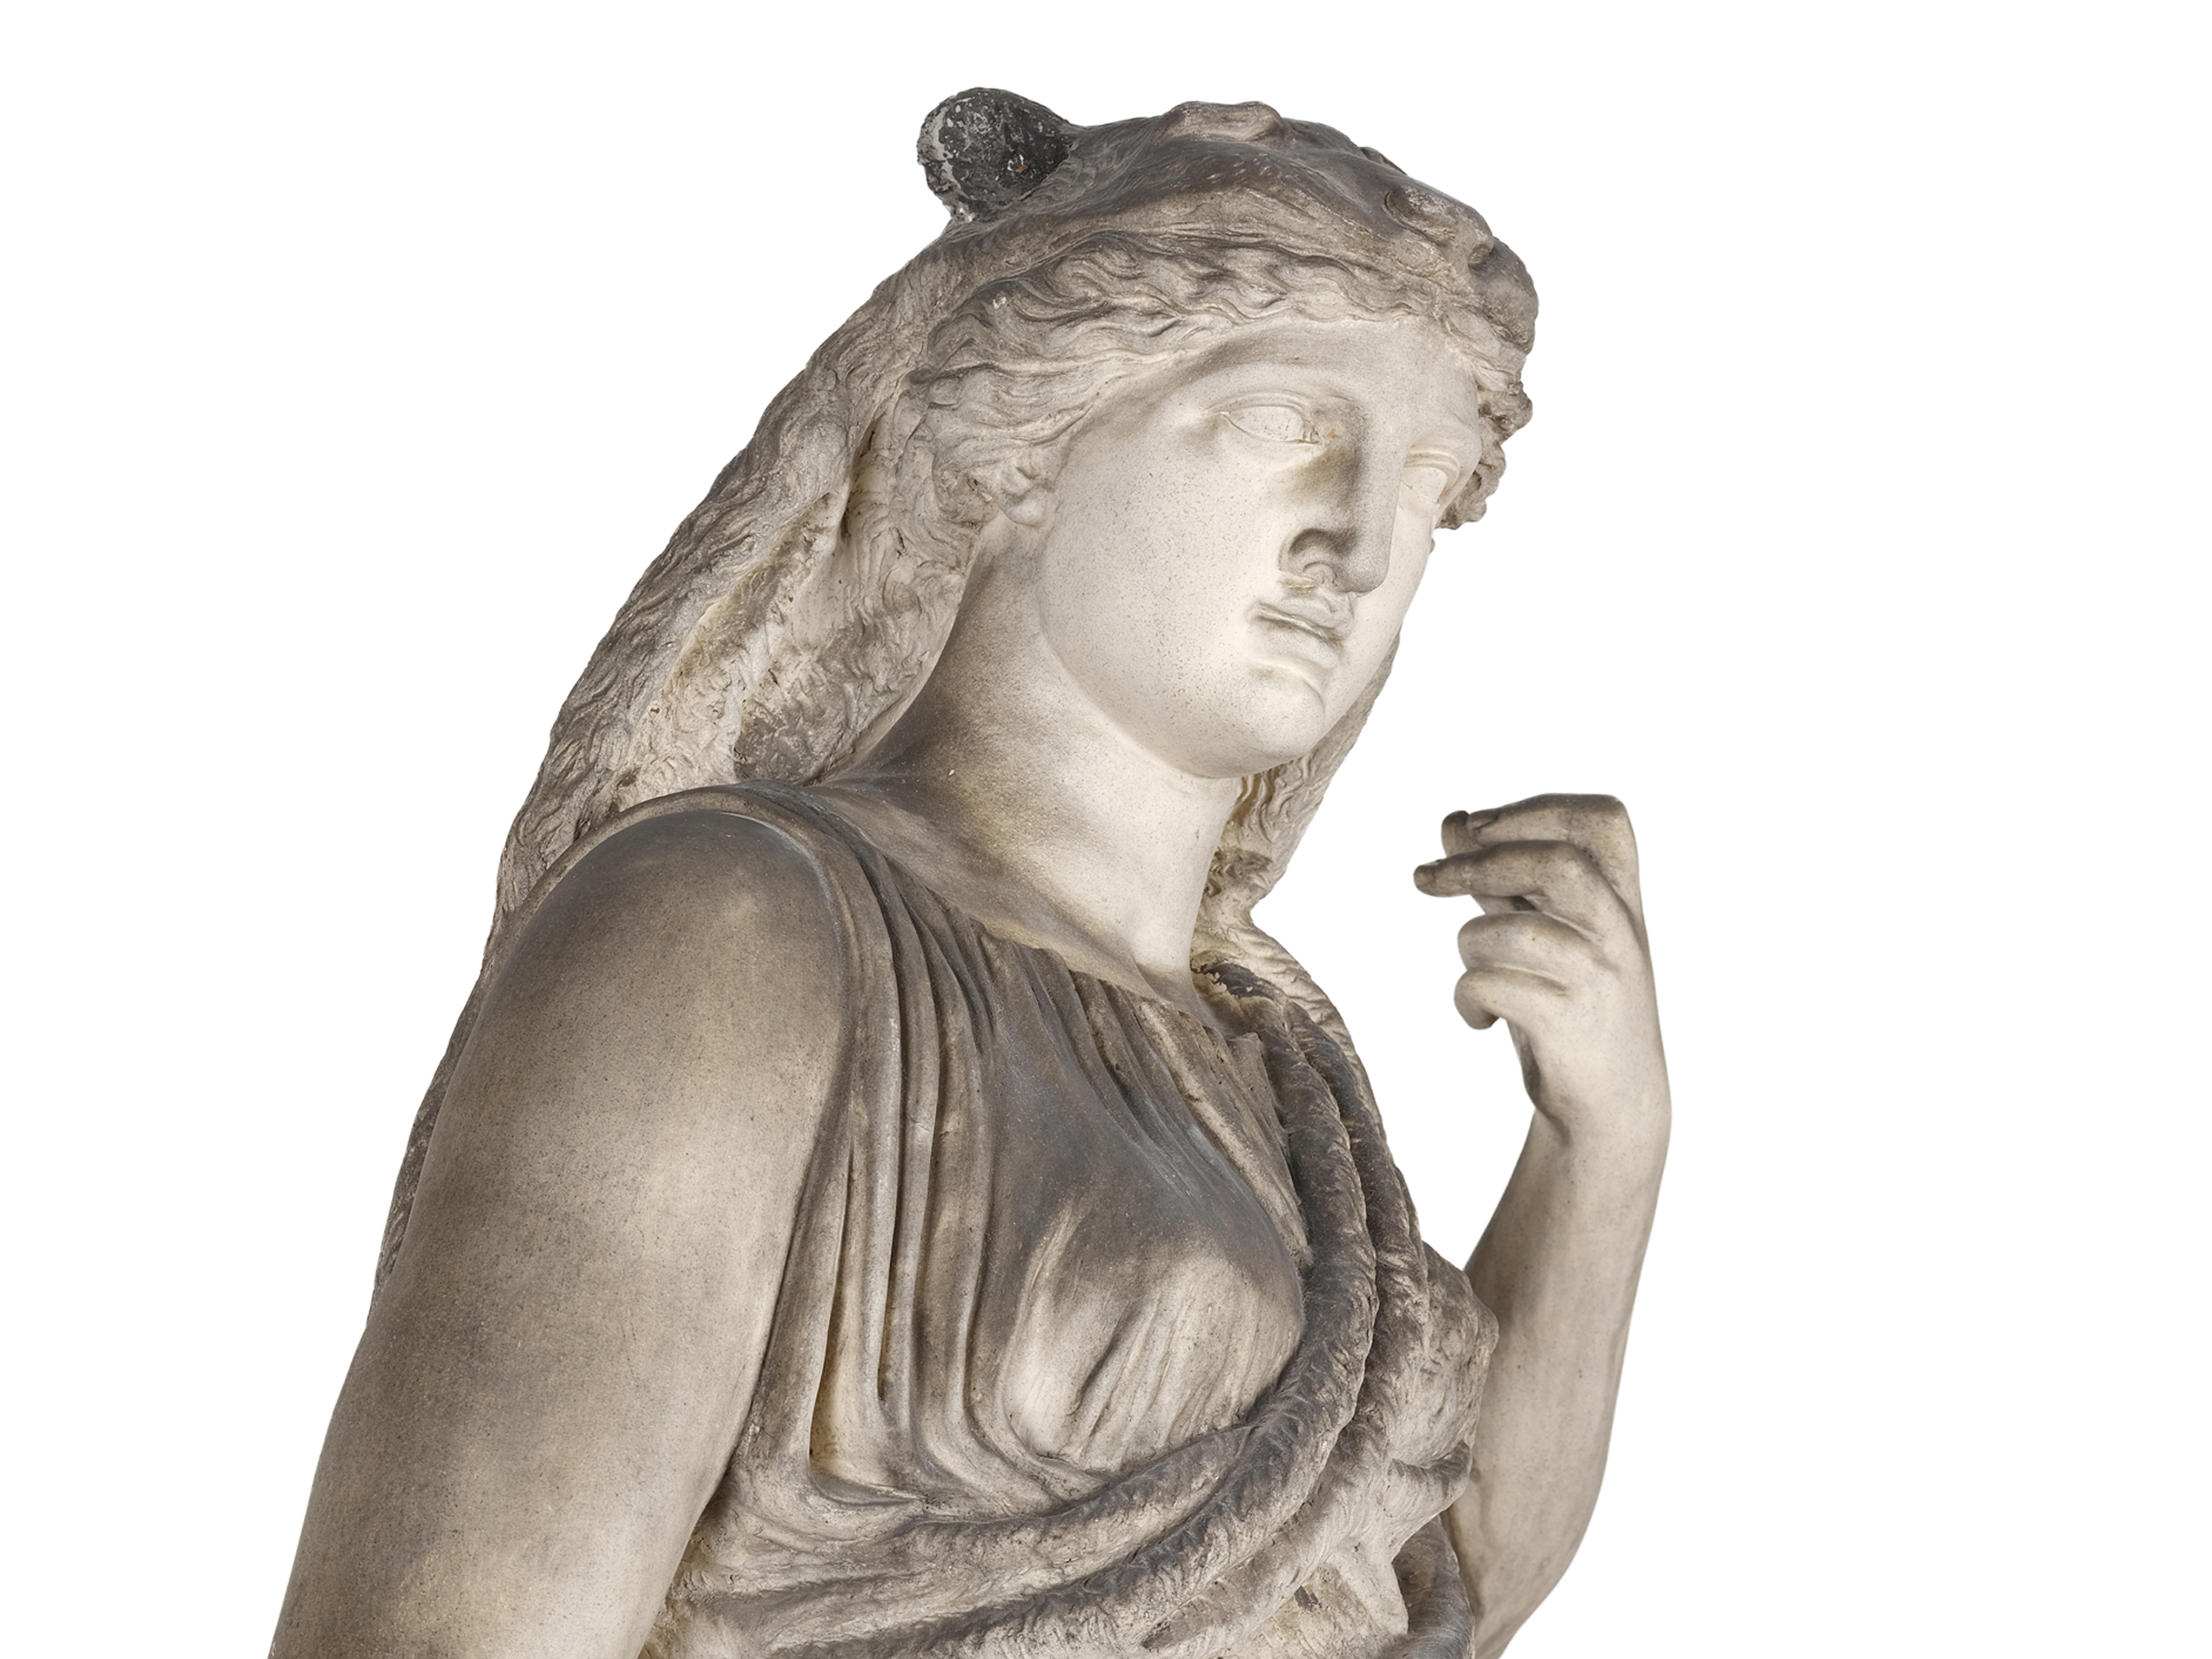 Depiction of a virtue from antiquity, mid-19th century - Image 2 of 8